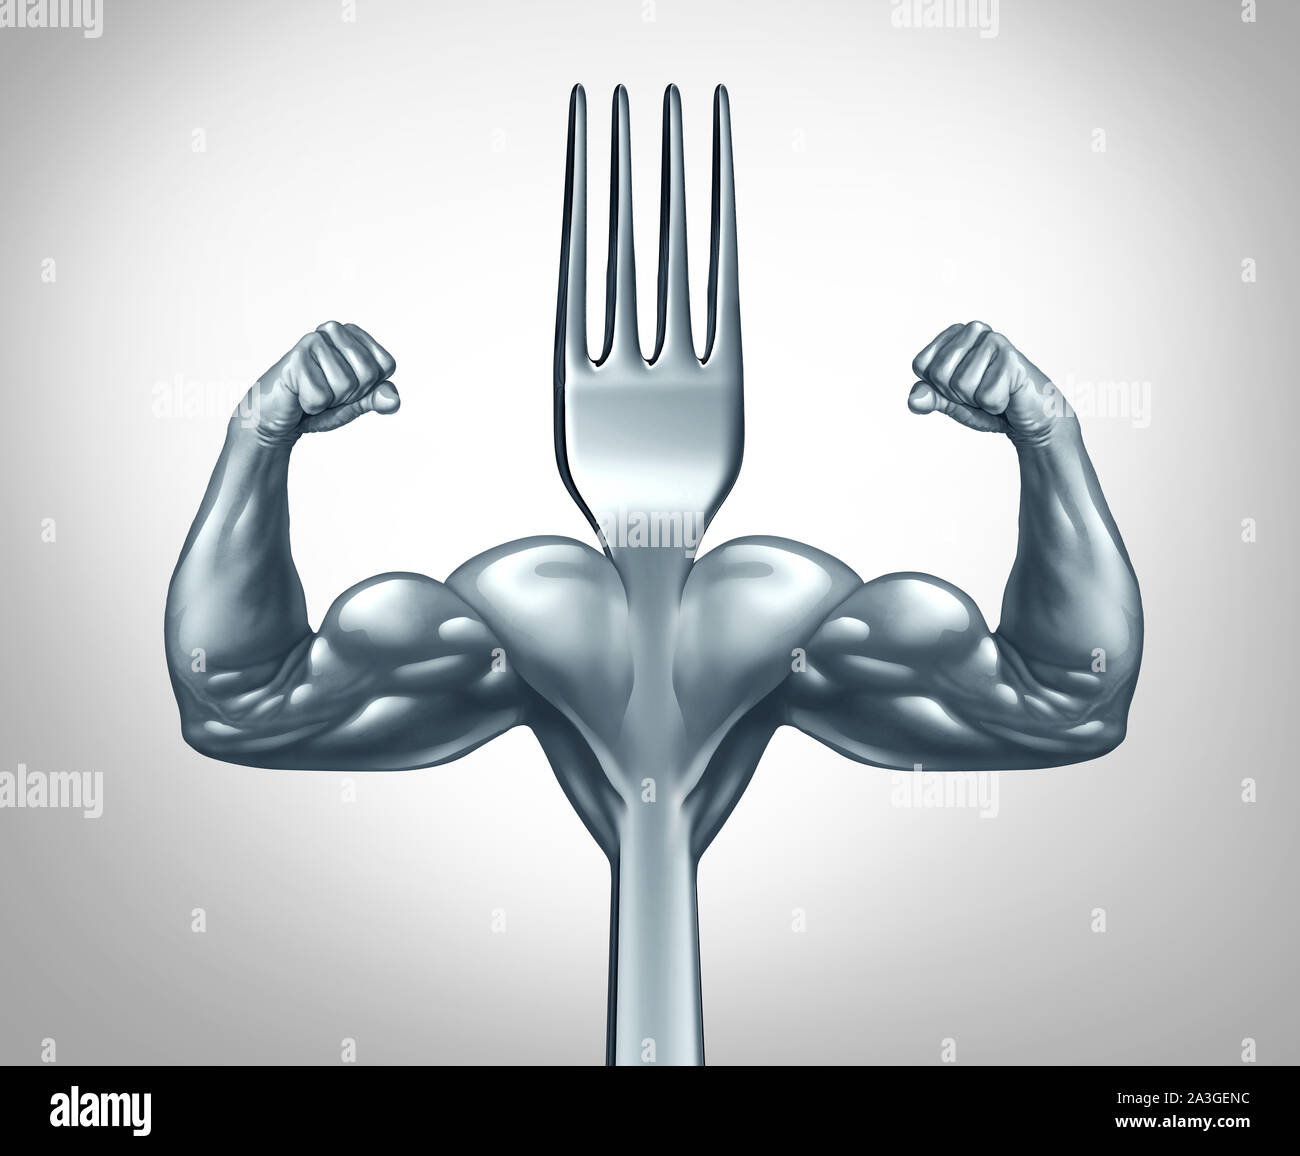 Eating fitness and power food symbol for workout or working out with nutritional supplement as a healthy fit lifestyle  as a fork with muscle. Stock Photo